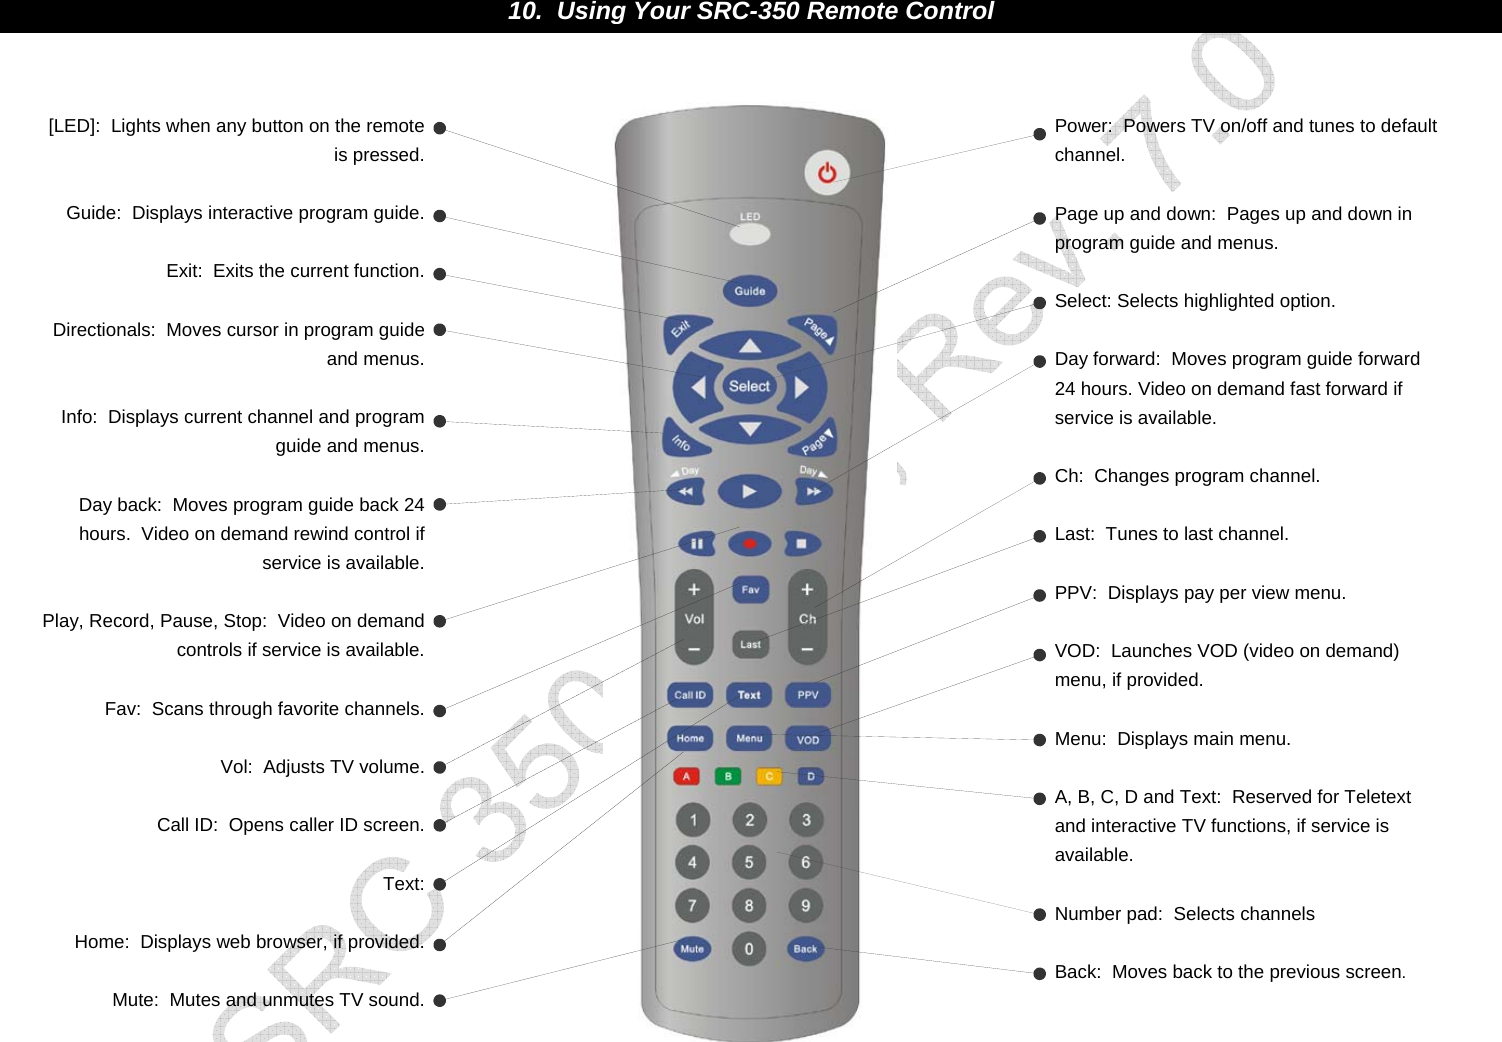                                                                                                         10.  Using Your SRC-350 Remote ControlPower:  Powers TV on/off and tunes to default channel.  Page up and down:  Pages up and down in program guide and menus.    Select: Selects highlighted option.  Day forward:  Moves program guide forward 24 hours. Video on demand fast forward if service is available.  Ch:  Changes program channel.   Last:  Tunes to last channel.  PPV:  Displays pay per view menu.    VOD:  Launches VOD (video on demand) menu, if provided.   Menu:  Displays main menu.  A, B, C, D and Text:  Reserved for Teletext and interactive TV functions, if service is available.   Number pad:  Selects channels  Back:  Moves back to the previous screen. [LED]:  Lights when any button on the remote is pressed.   Guide:  Displays interactive program guide.  Exit:  Exits the current function.   Directionals:  Moves cursor in program guide and menus.  Info:  Displays current channel and program guide and menus.   Day back:  Moves program guide back 24  hours.  Video on demand rewind control if service is available.   Play, Record, Pause, Stop:  Video on demand controls if service is available.  Fav:  Scans through favorite channels.   Vol:  Adjusts TV volume.   Call ID:  Opens caller ID screen.   Text:  Home:  Displays web browser, if provided.   Mute:  Mutes and unmutes TV sound.   